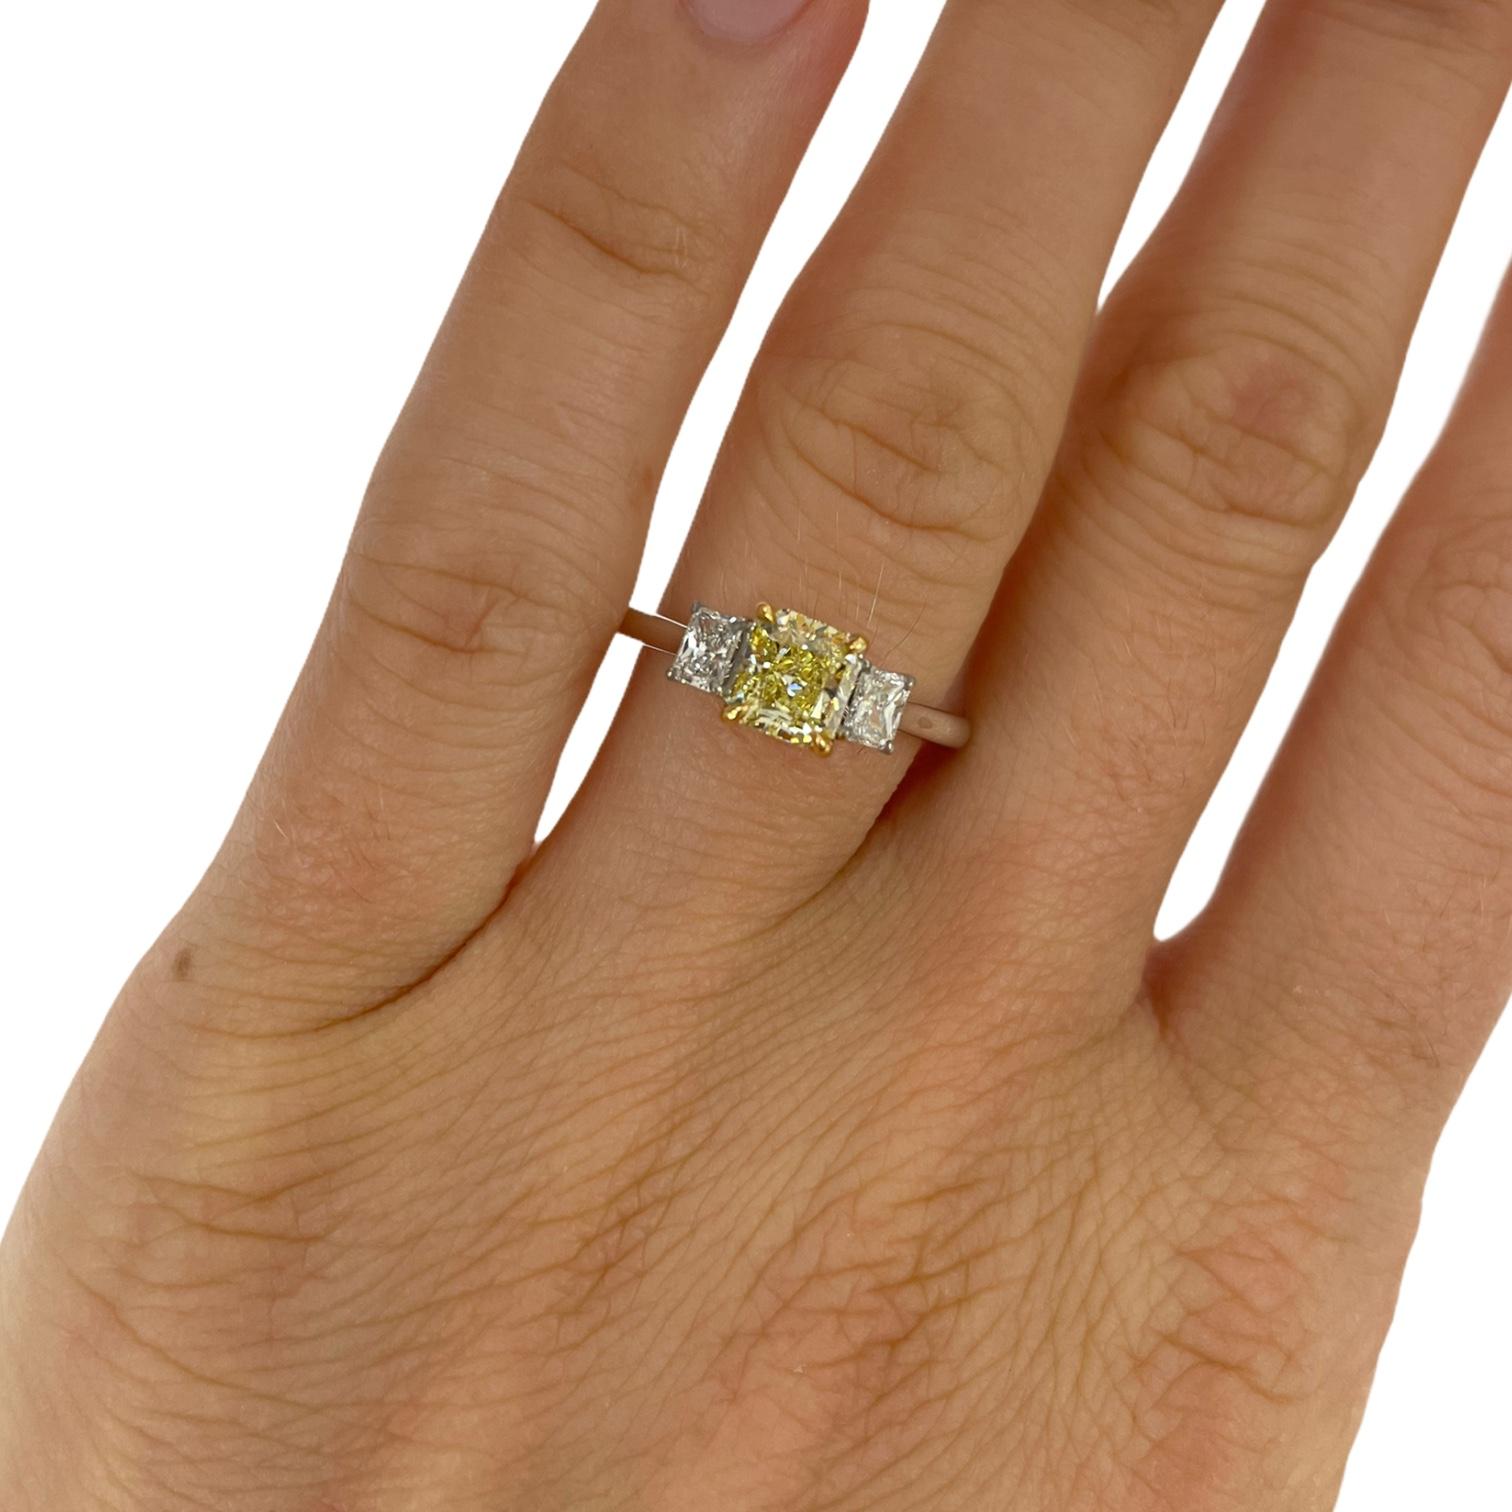 Ladies three stone fancy yellow and white diamond ring in 18k white gold. Ring contains 1 center radiant cut fancy yellow diamond, 1.02cts and 2 side radiant cut white diamonds, 0.31tcw. Center fancy yellow diamond is GIA certified.. Side white